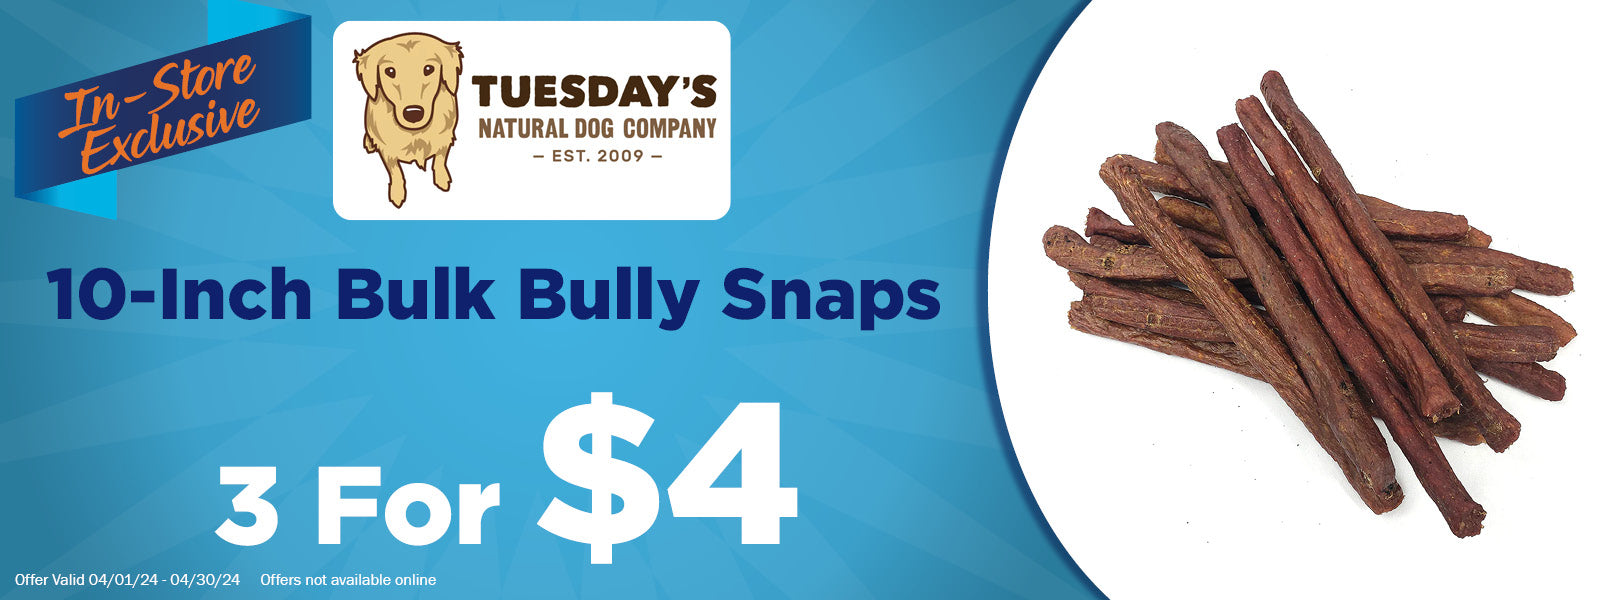 In-Store Exclusive Offer - Tuesday's Natural Dog Co. 10 Inch Bulk Bully Snaps 3 for $4